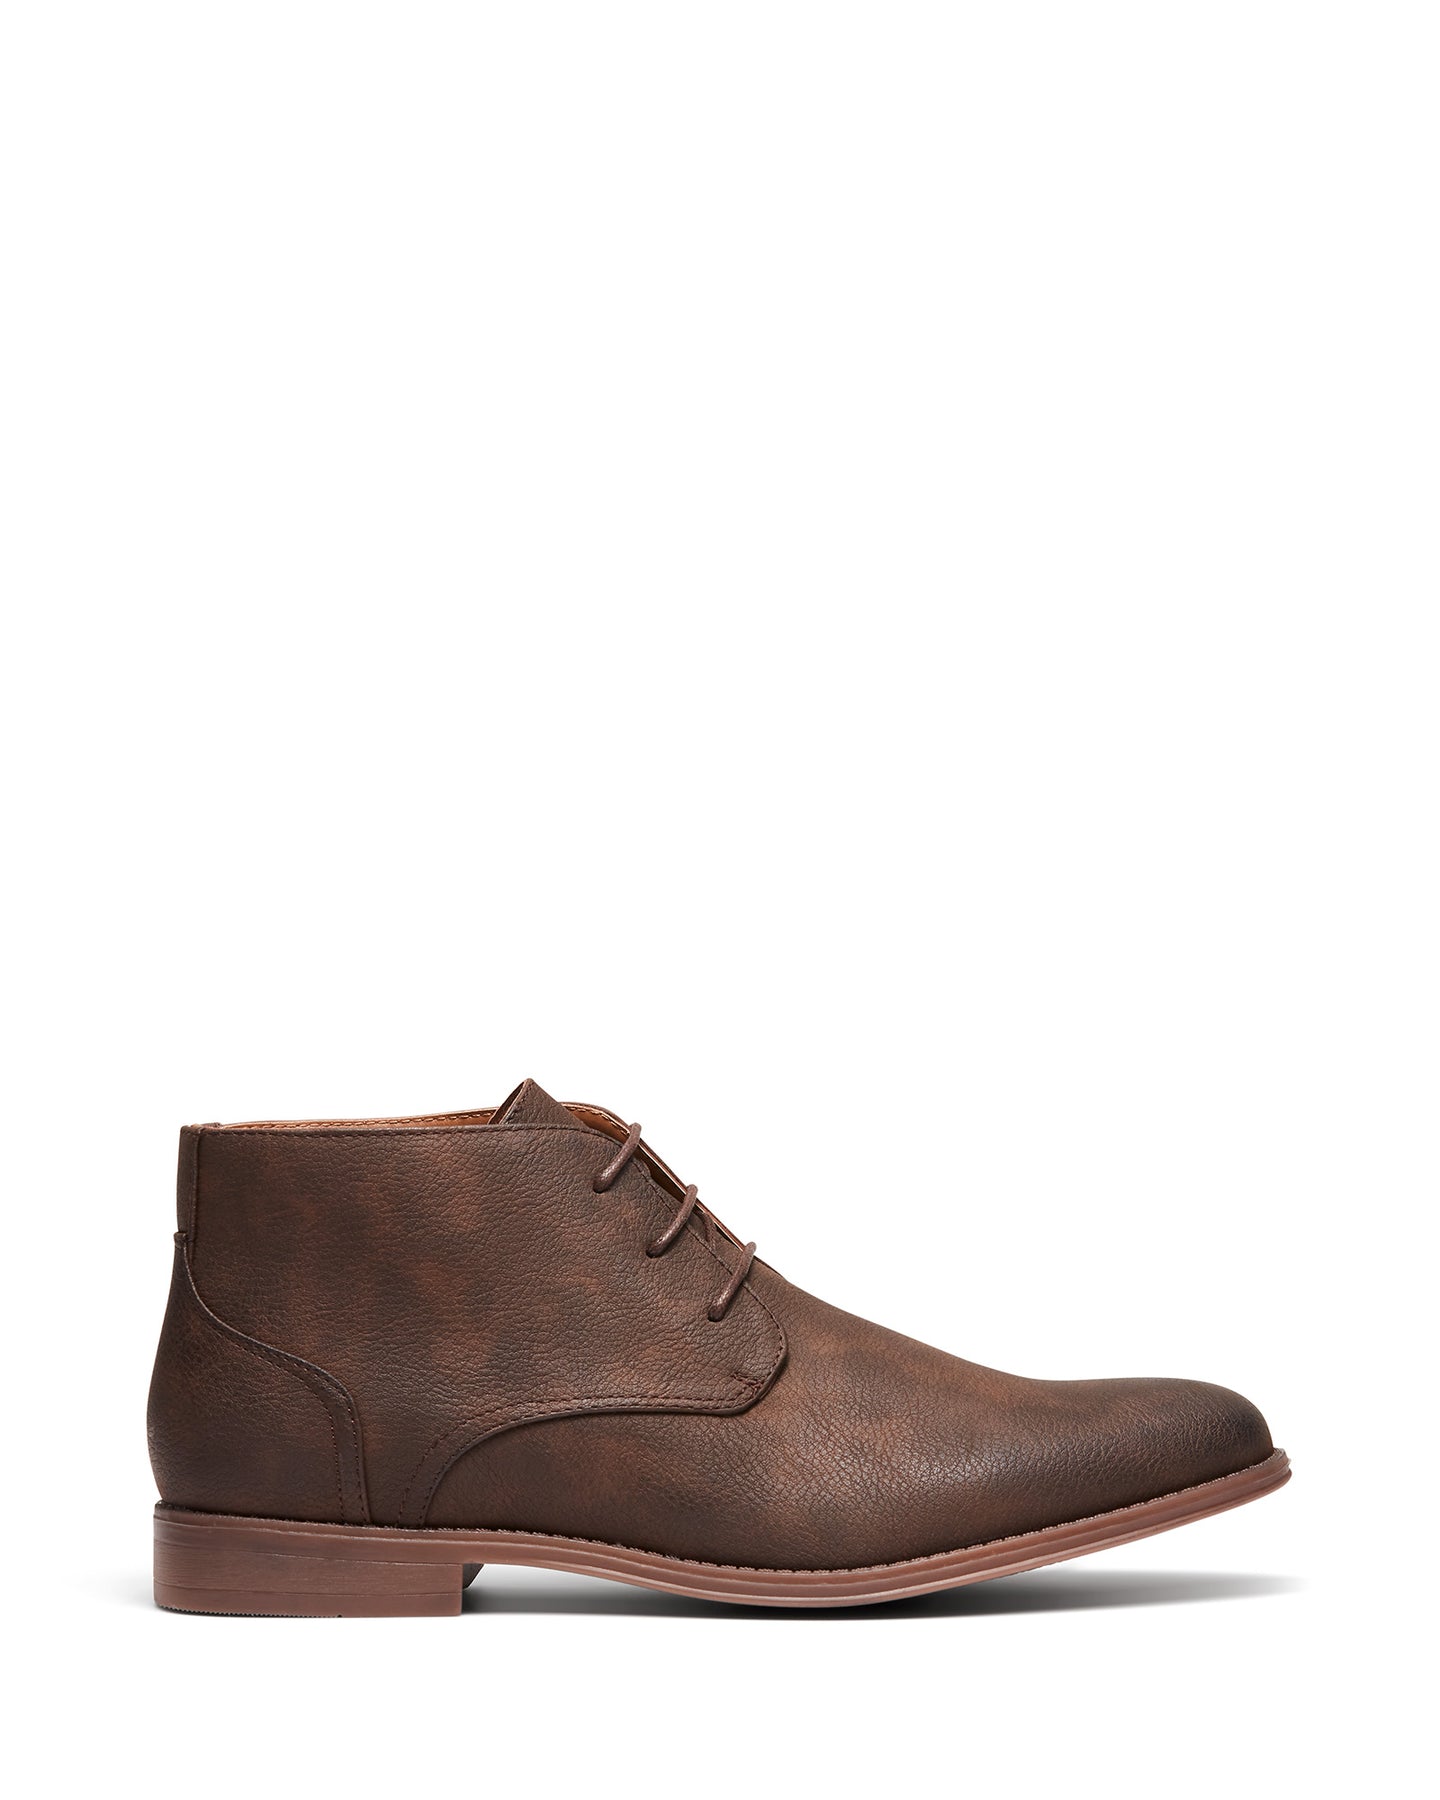 Uncut Shoes Chester Brown | Men's Boot | Desert Boot | Lace Up